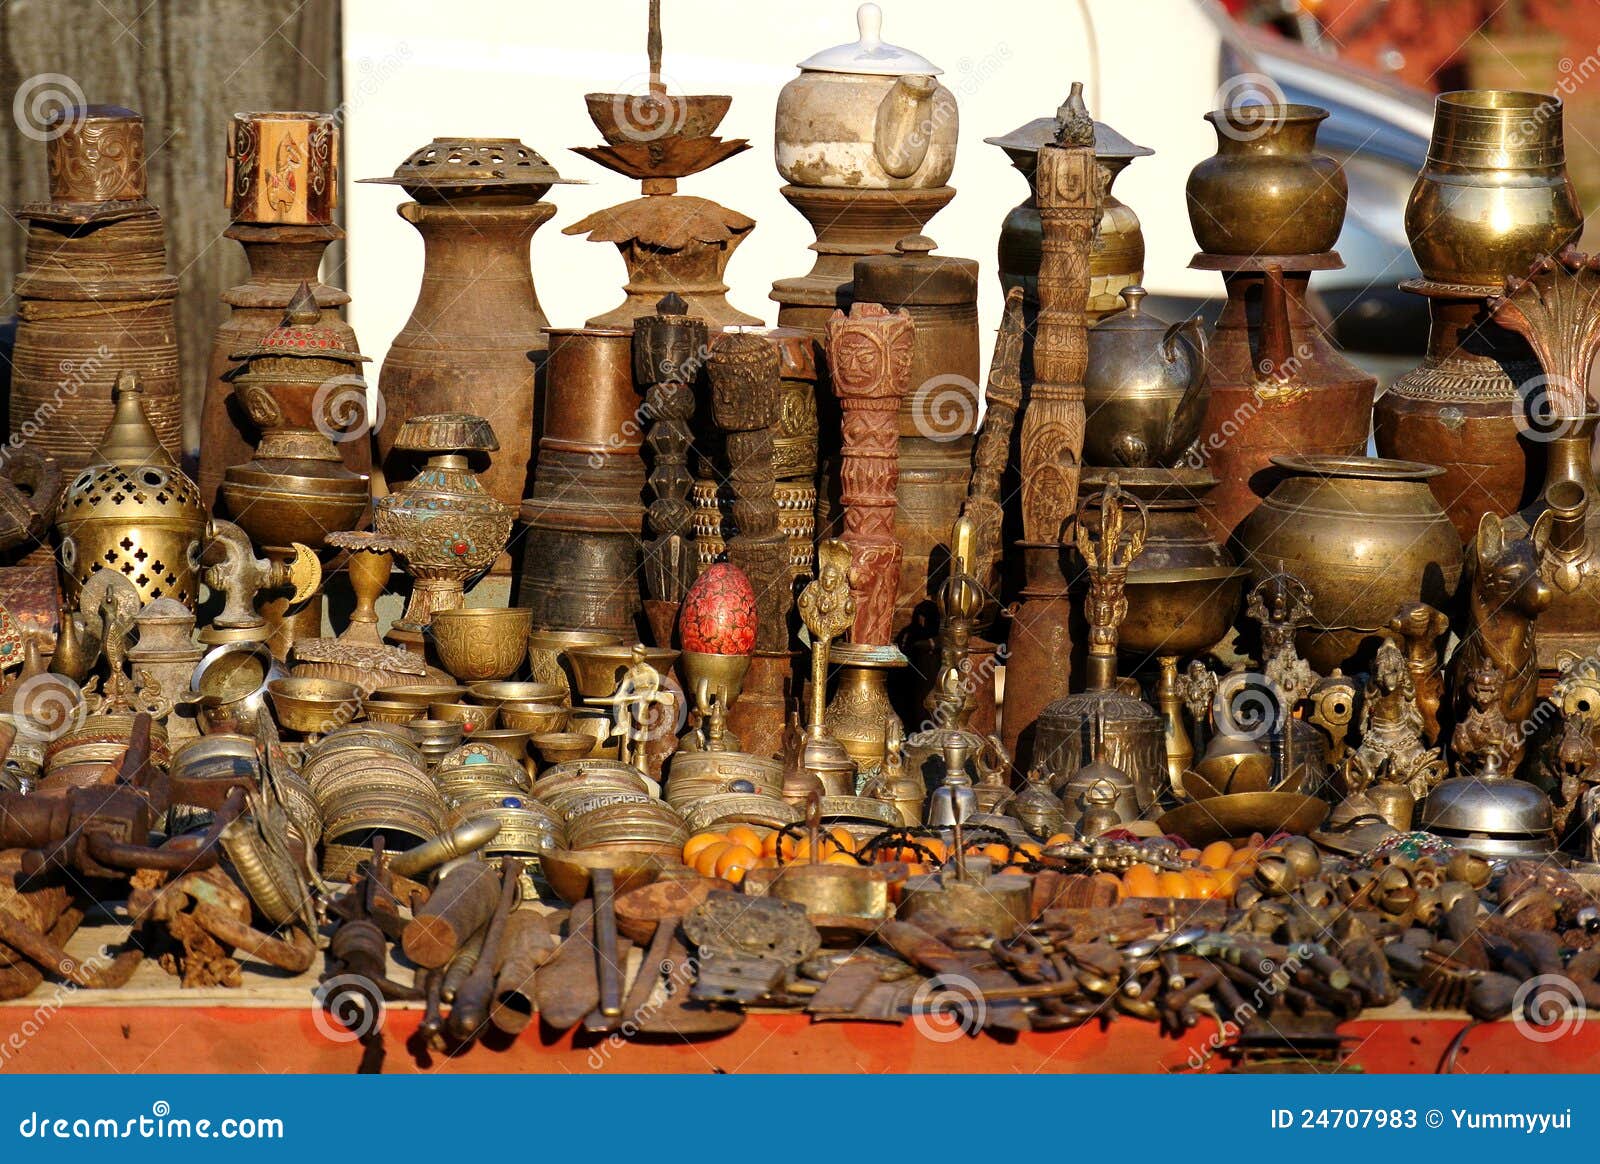 Vintage Metallic and Copper Stuff Sold on a Market in Jerusalem Old City,  Israel Stock Image - Image of ancient, bronze: 164453711